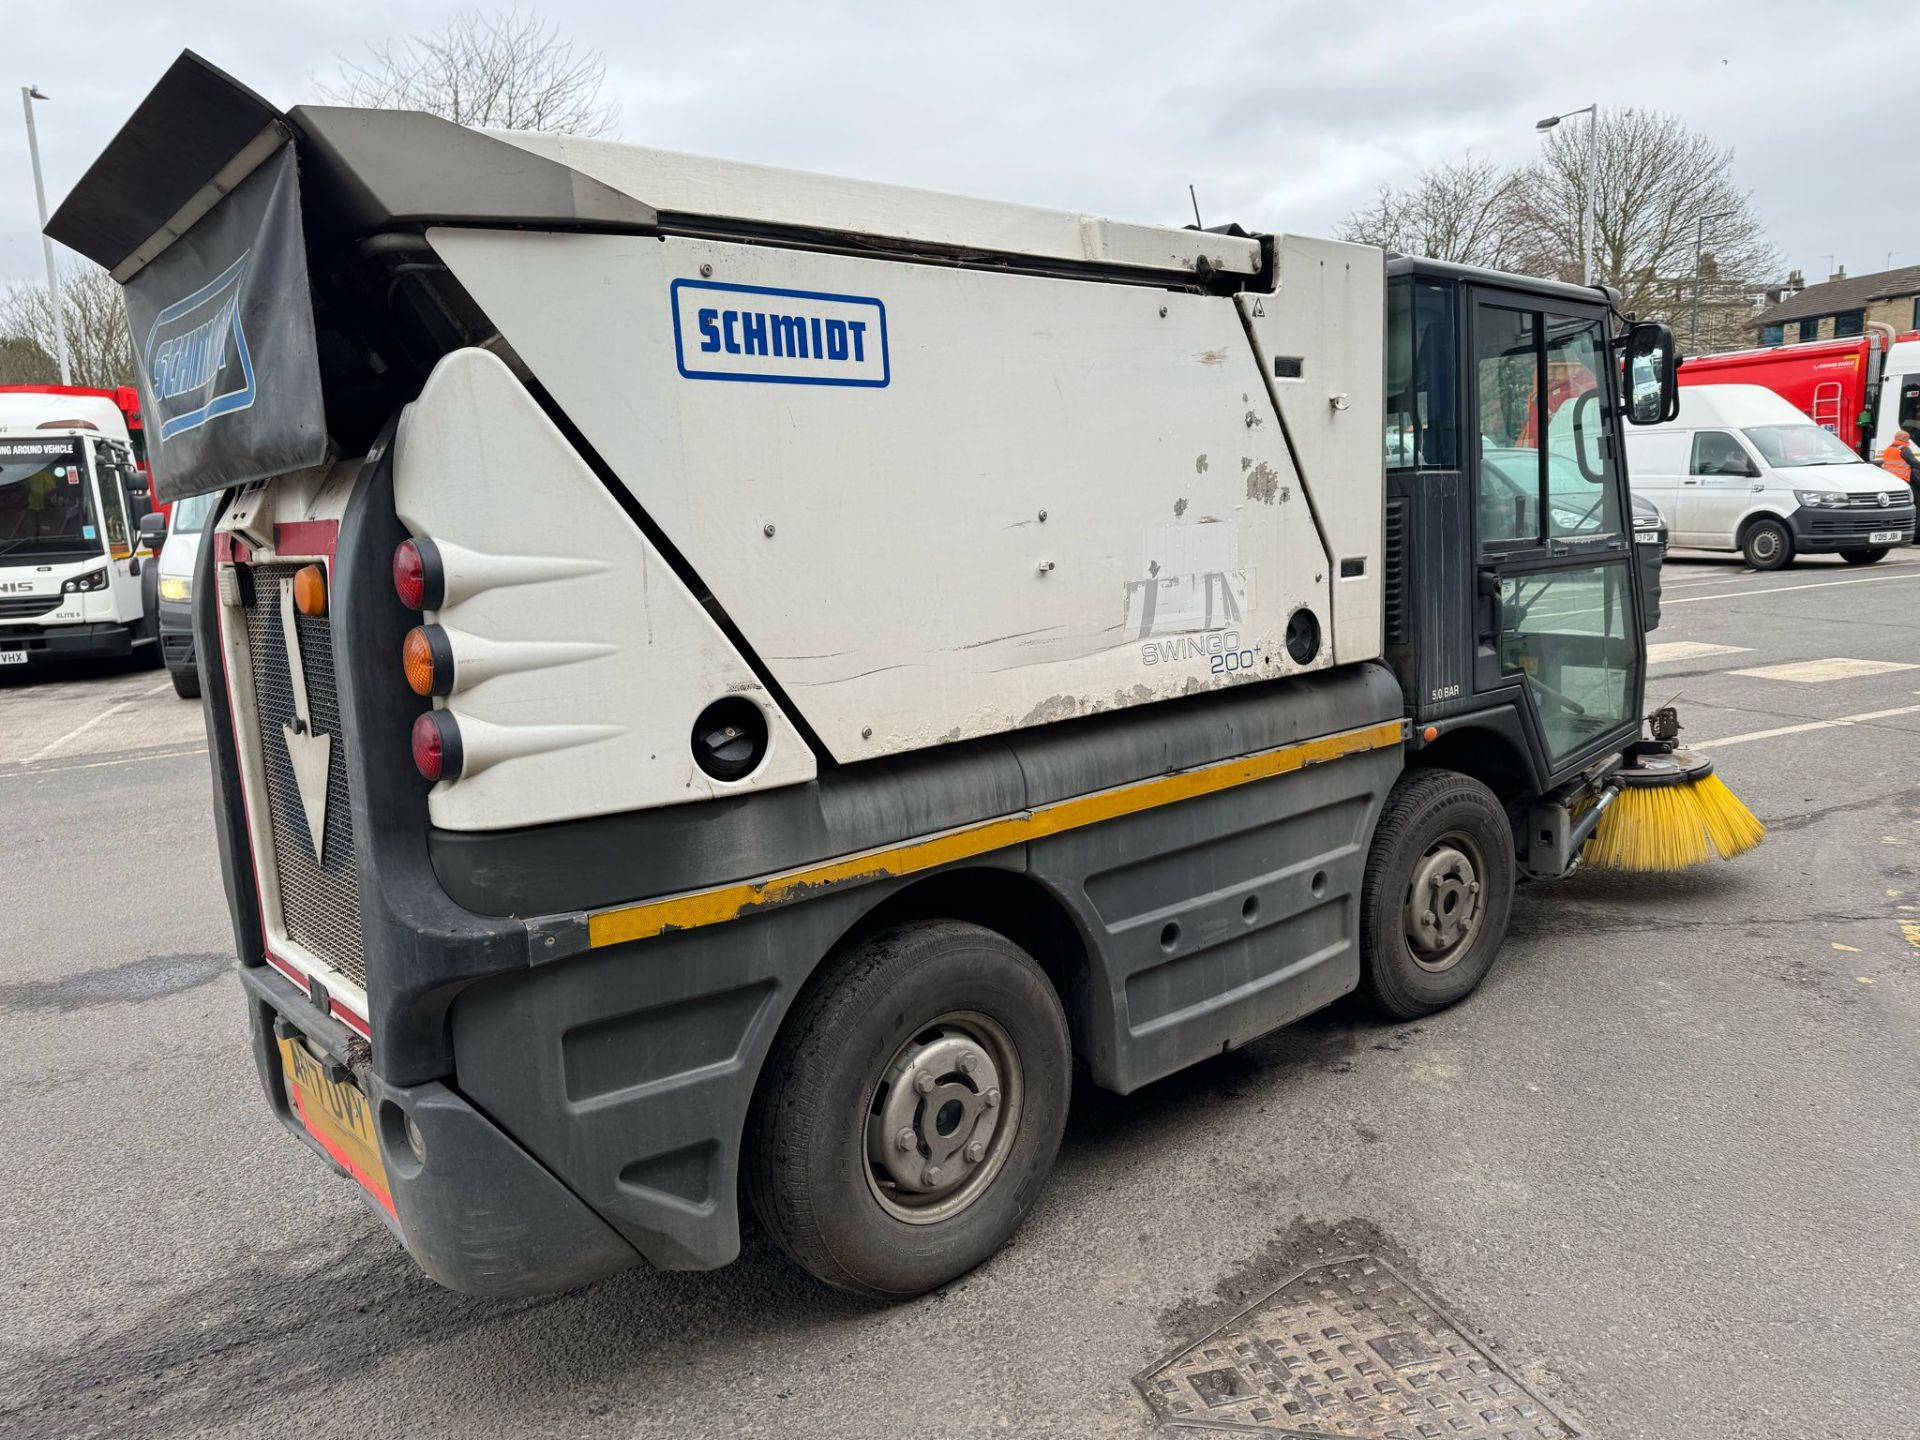 2017, SCHMIDT - Compact 200 Road Sweeper (Ex-Council fleet owned and maintained) - Bild 3 aus 32